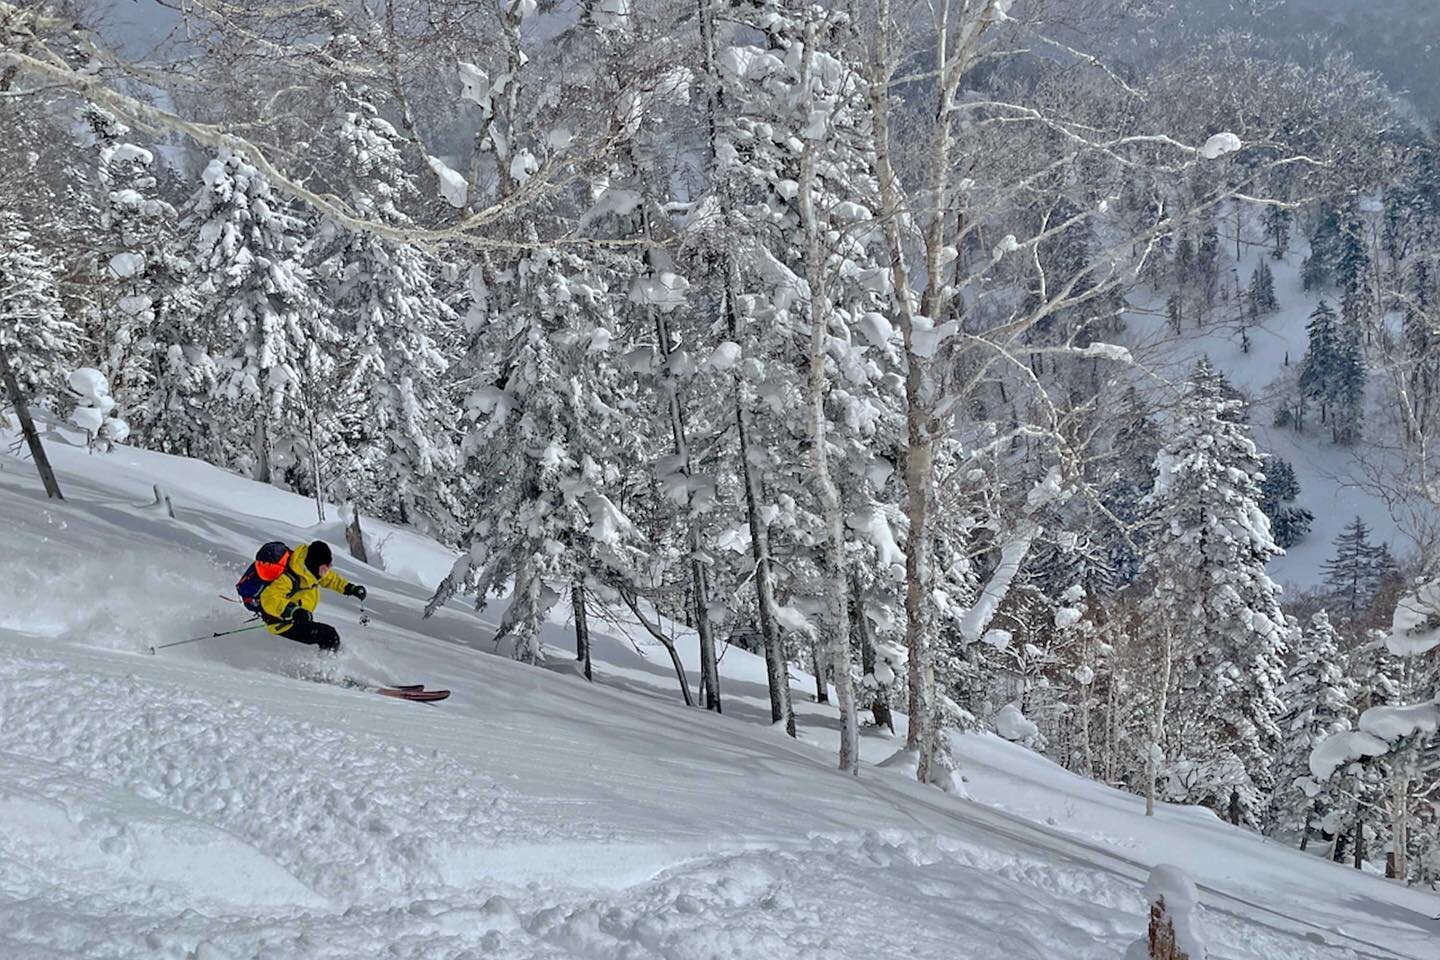 Come and experience the best that Hokkaido has to offer!!!

Bookings are now open for the 23/24 season ⛷️